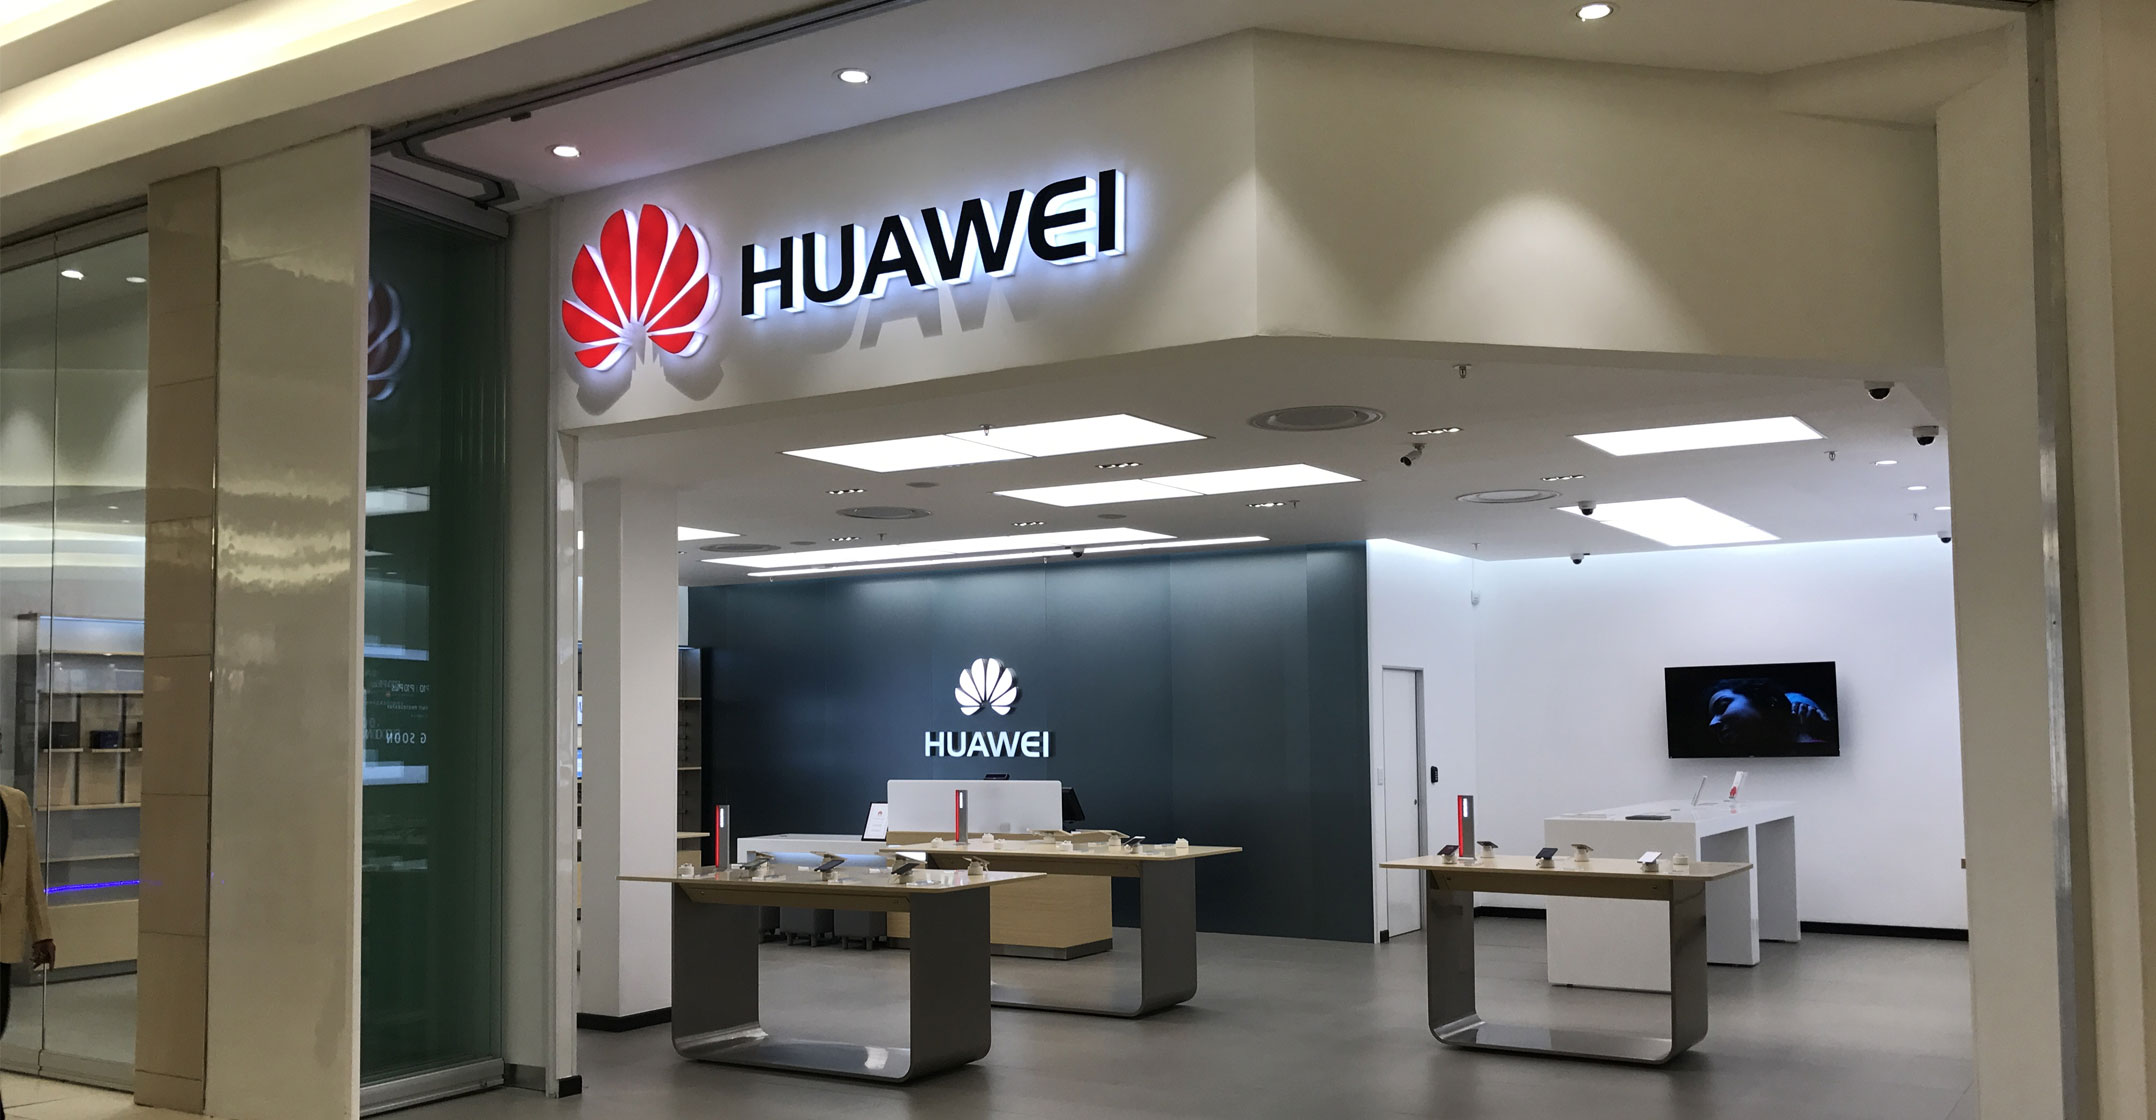 Ugly dispute sees SA Huawei retail stores closed - TechCentral